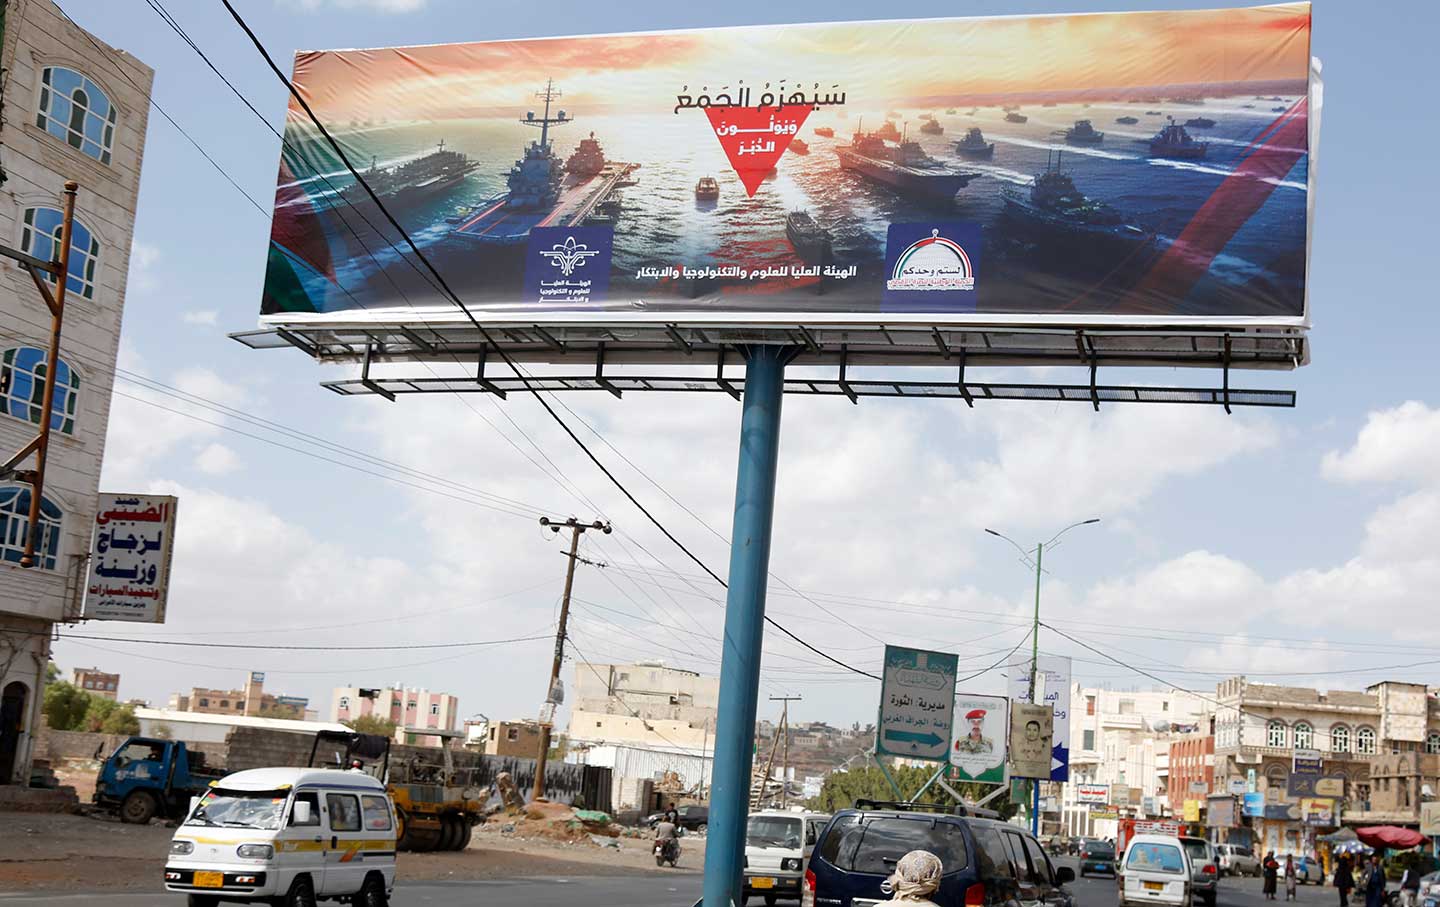 Yemenis drive past a large billboard with a picture depicting the navy destroyers of foreign countries including the US and UK, and the words “Navy coalition will be defeated” at a street on December 31, 2023 in Sana'a, Yemen.